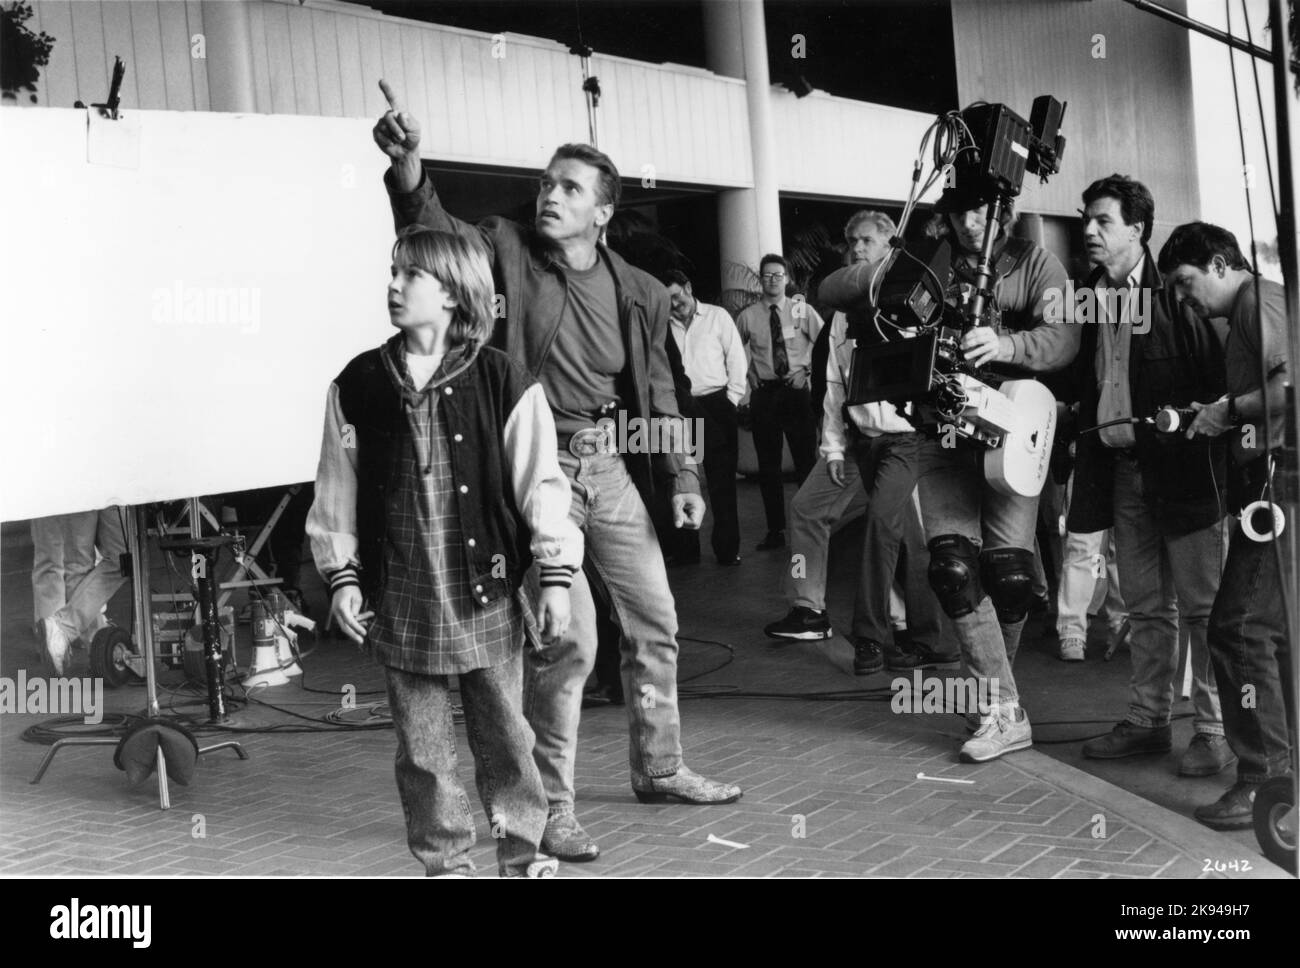 AUSTIN O'BRIEN ARNOLD SCHWARZENEGGER and Director JOHN McTIERNAN on set location candid with Movie Crew including Steadicam Operator MARK O'KANE during filming of LAST ACTION HERO 1993 director JOHN McTIERNAN music Michael Kamen Oak Productions / Columbia Pictures Stock Photo